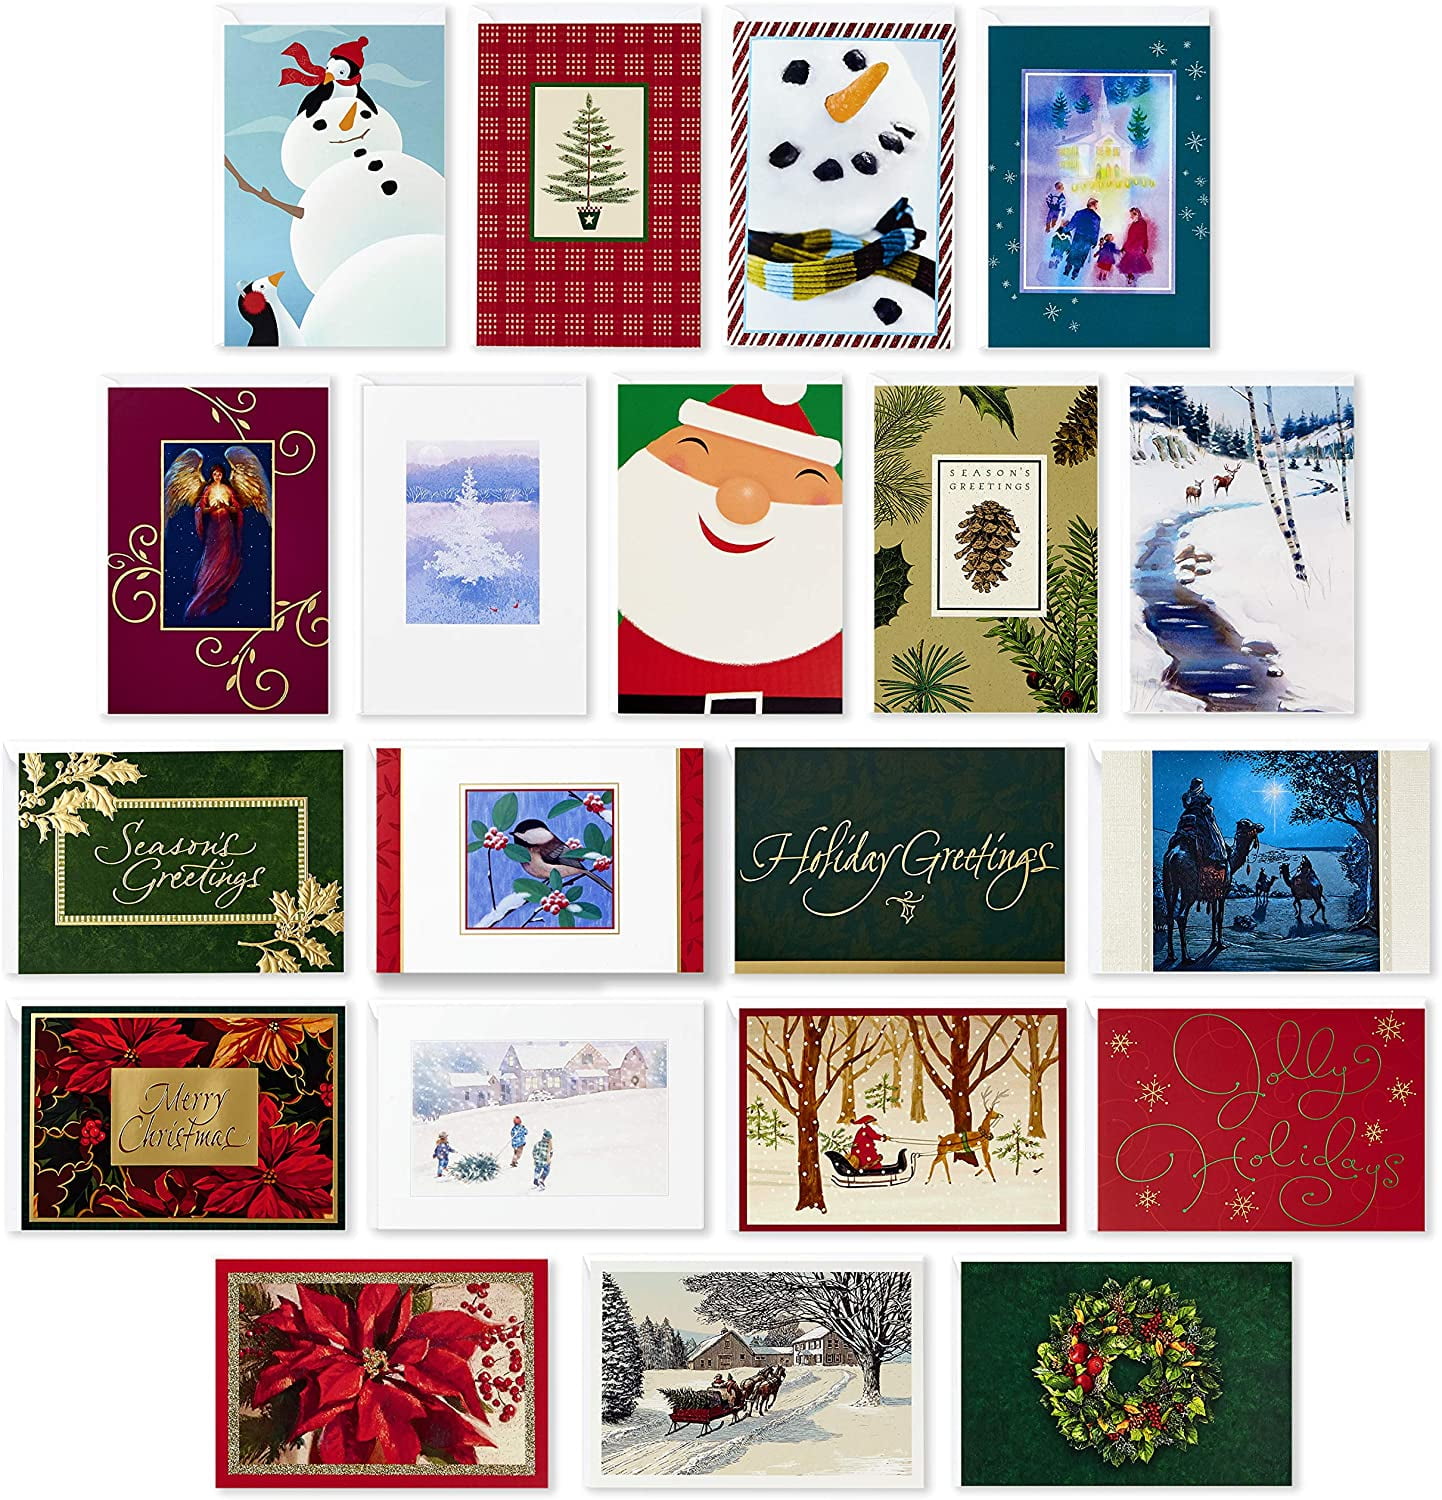 The Best Hallmark Christmas Cards 2022 Wallpapers Map 2023 | Images and ...